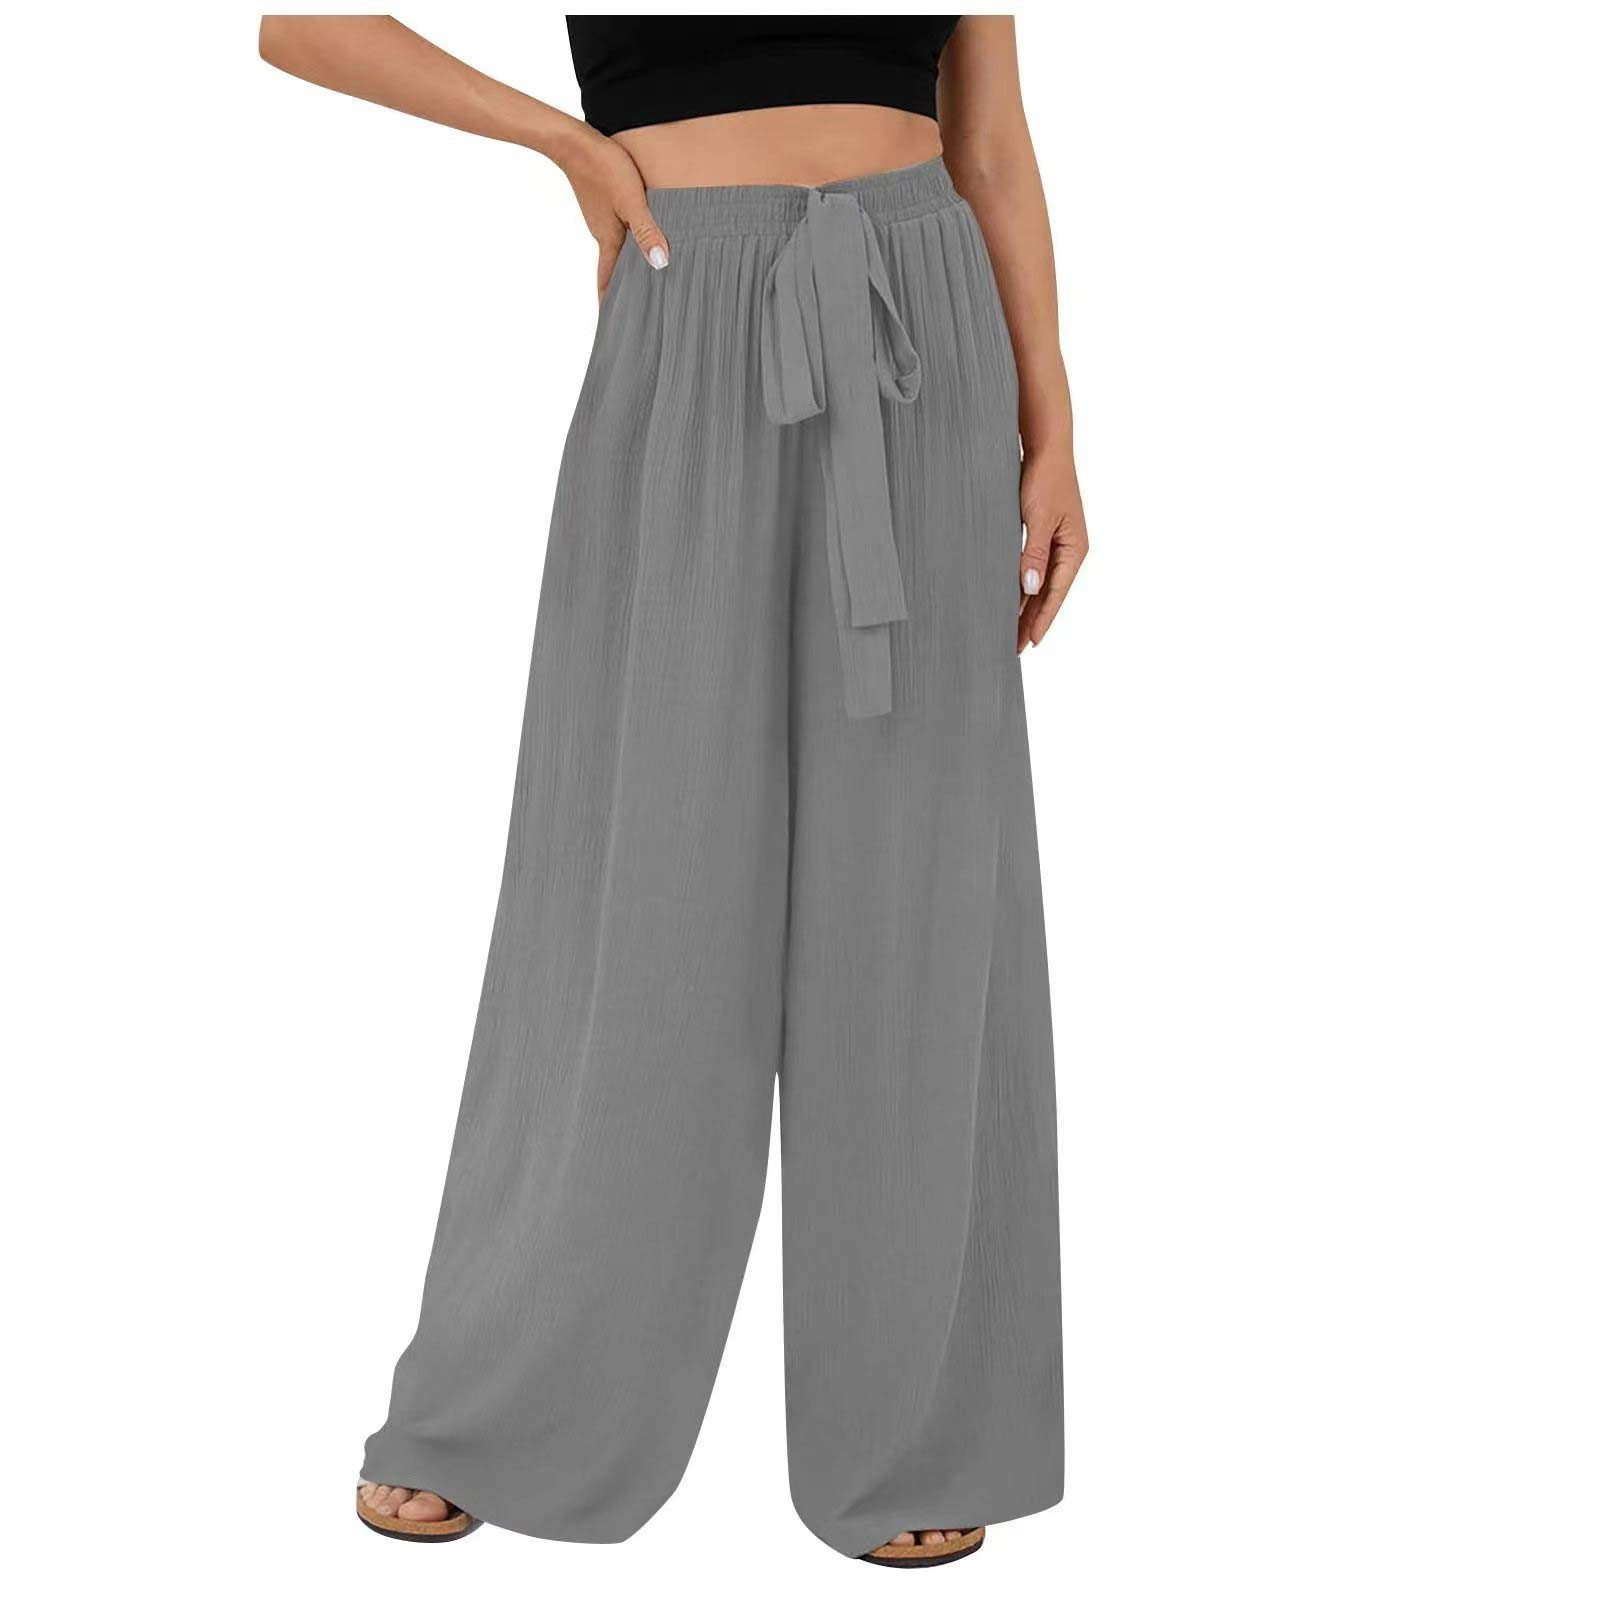 Aofany Women's Wide Leg Lounge Pants with Pockets Lightweight High ...